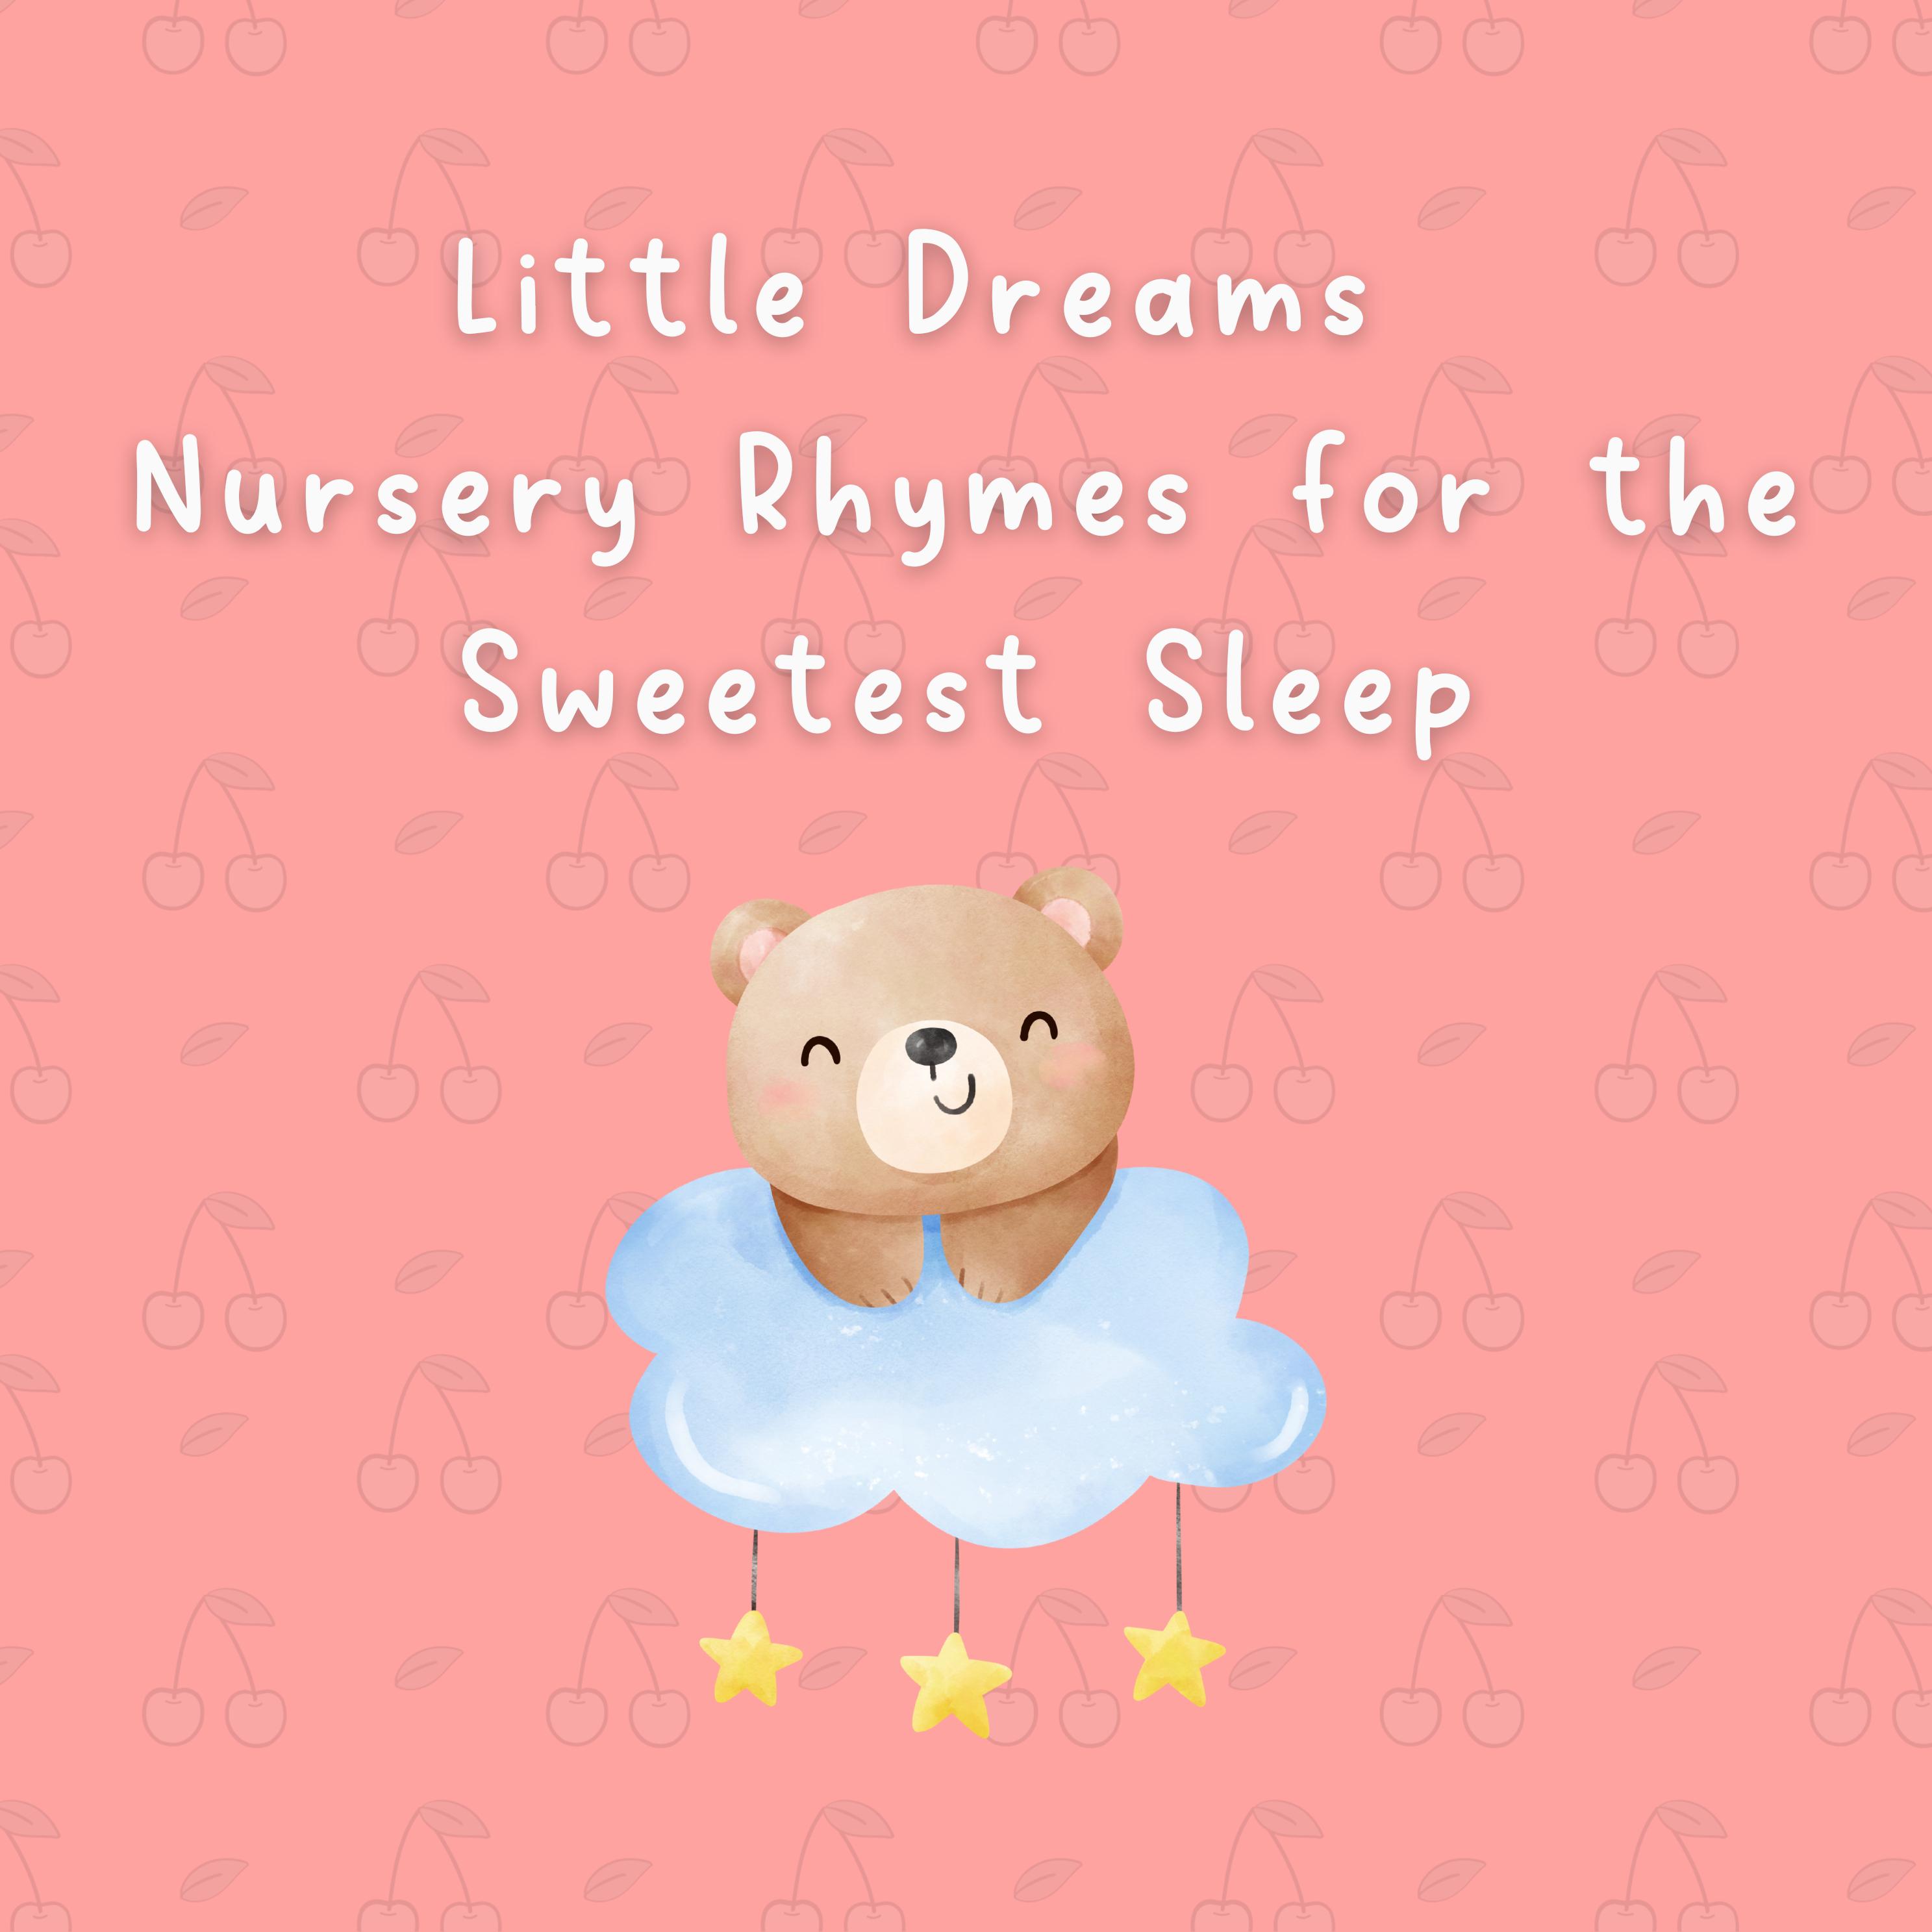 Baby Nap Time - The Frolicking Fawn's Fanfare (Nursery Rhymes to Help Baby Sleep)